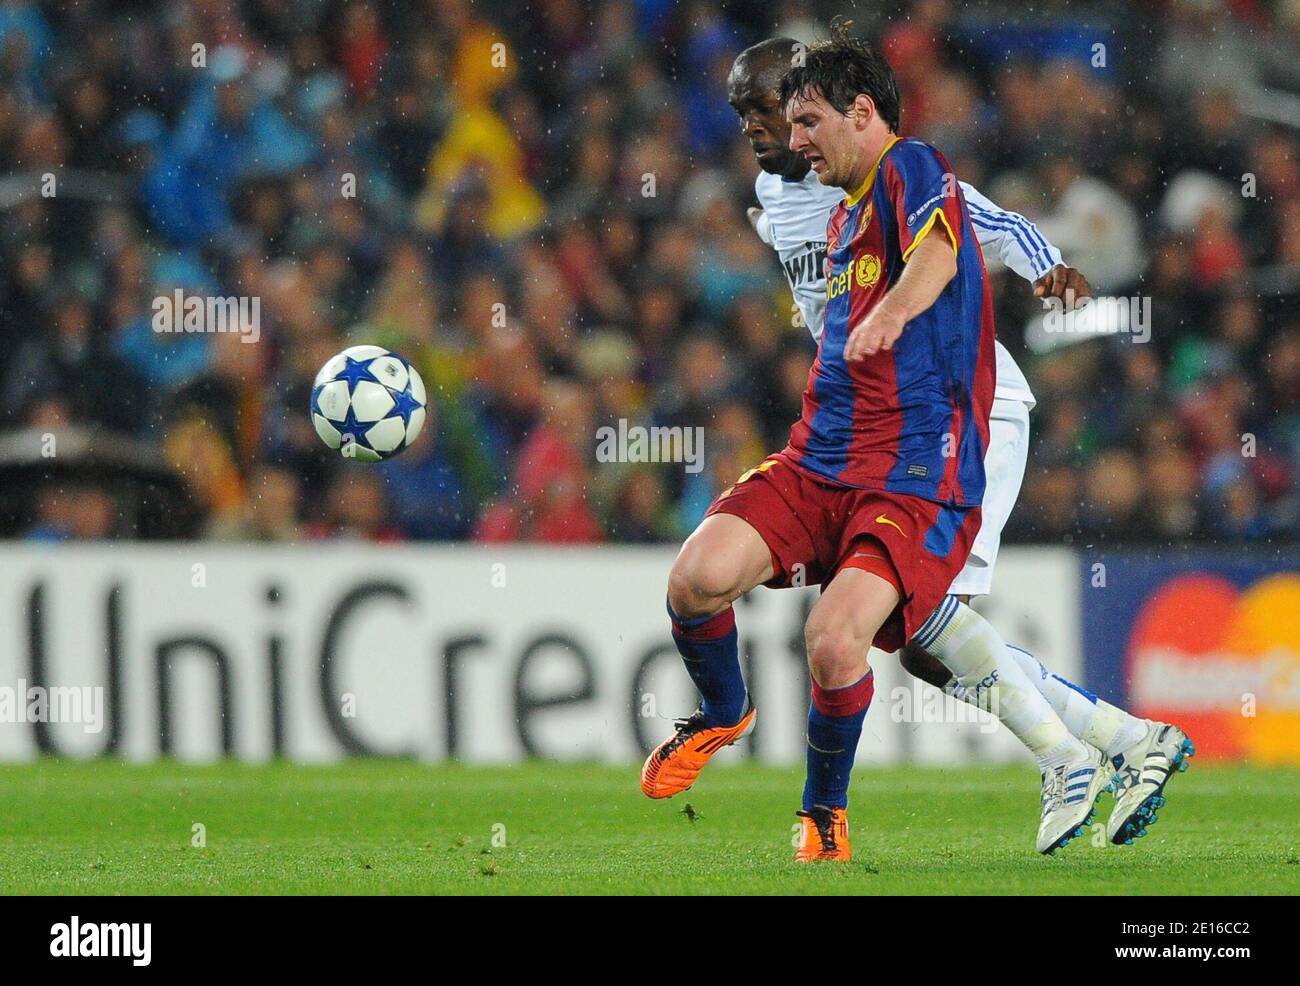 Barcelona's Lionel Messi and Real Madrid's Lassana Diarra fight for the  ball during the UEFA Champions League Semi Final, second leg soccer match,  FC Barcelona Vs Real Madrid at Nou Camp in